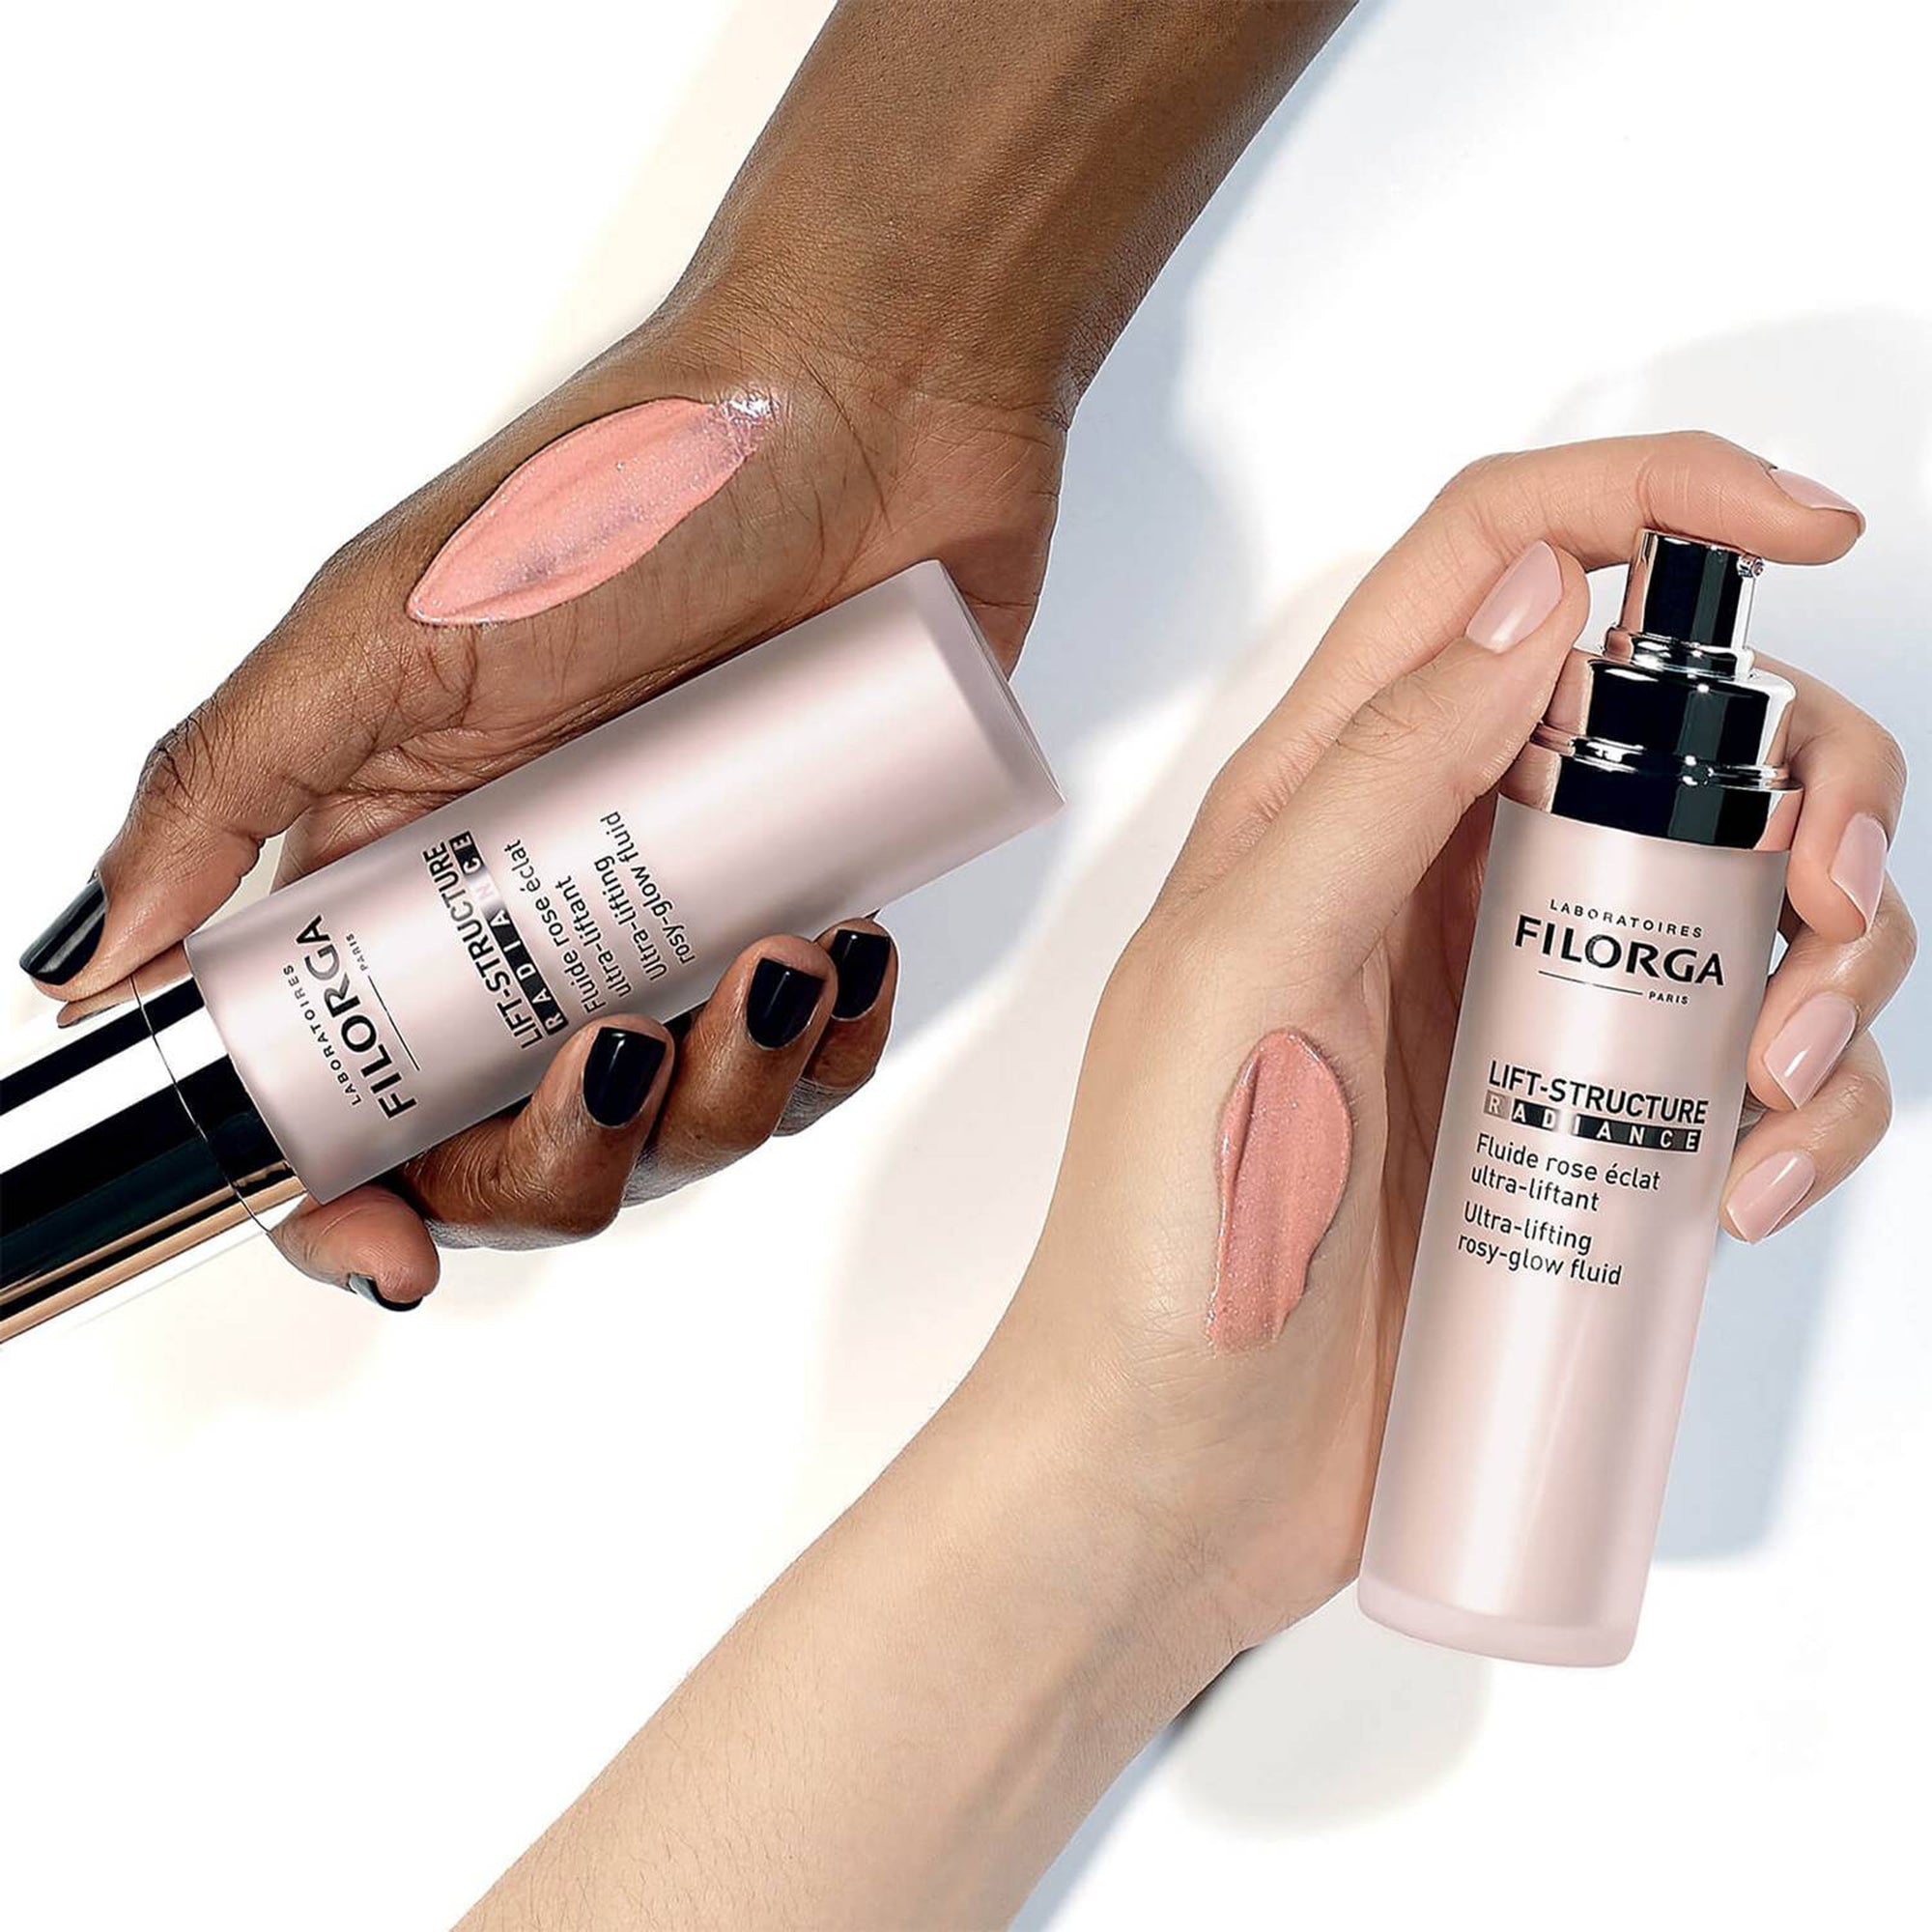 Lift-Structure Radiance Tinted Ultra-Lifting Rosy-Glow Fluid